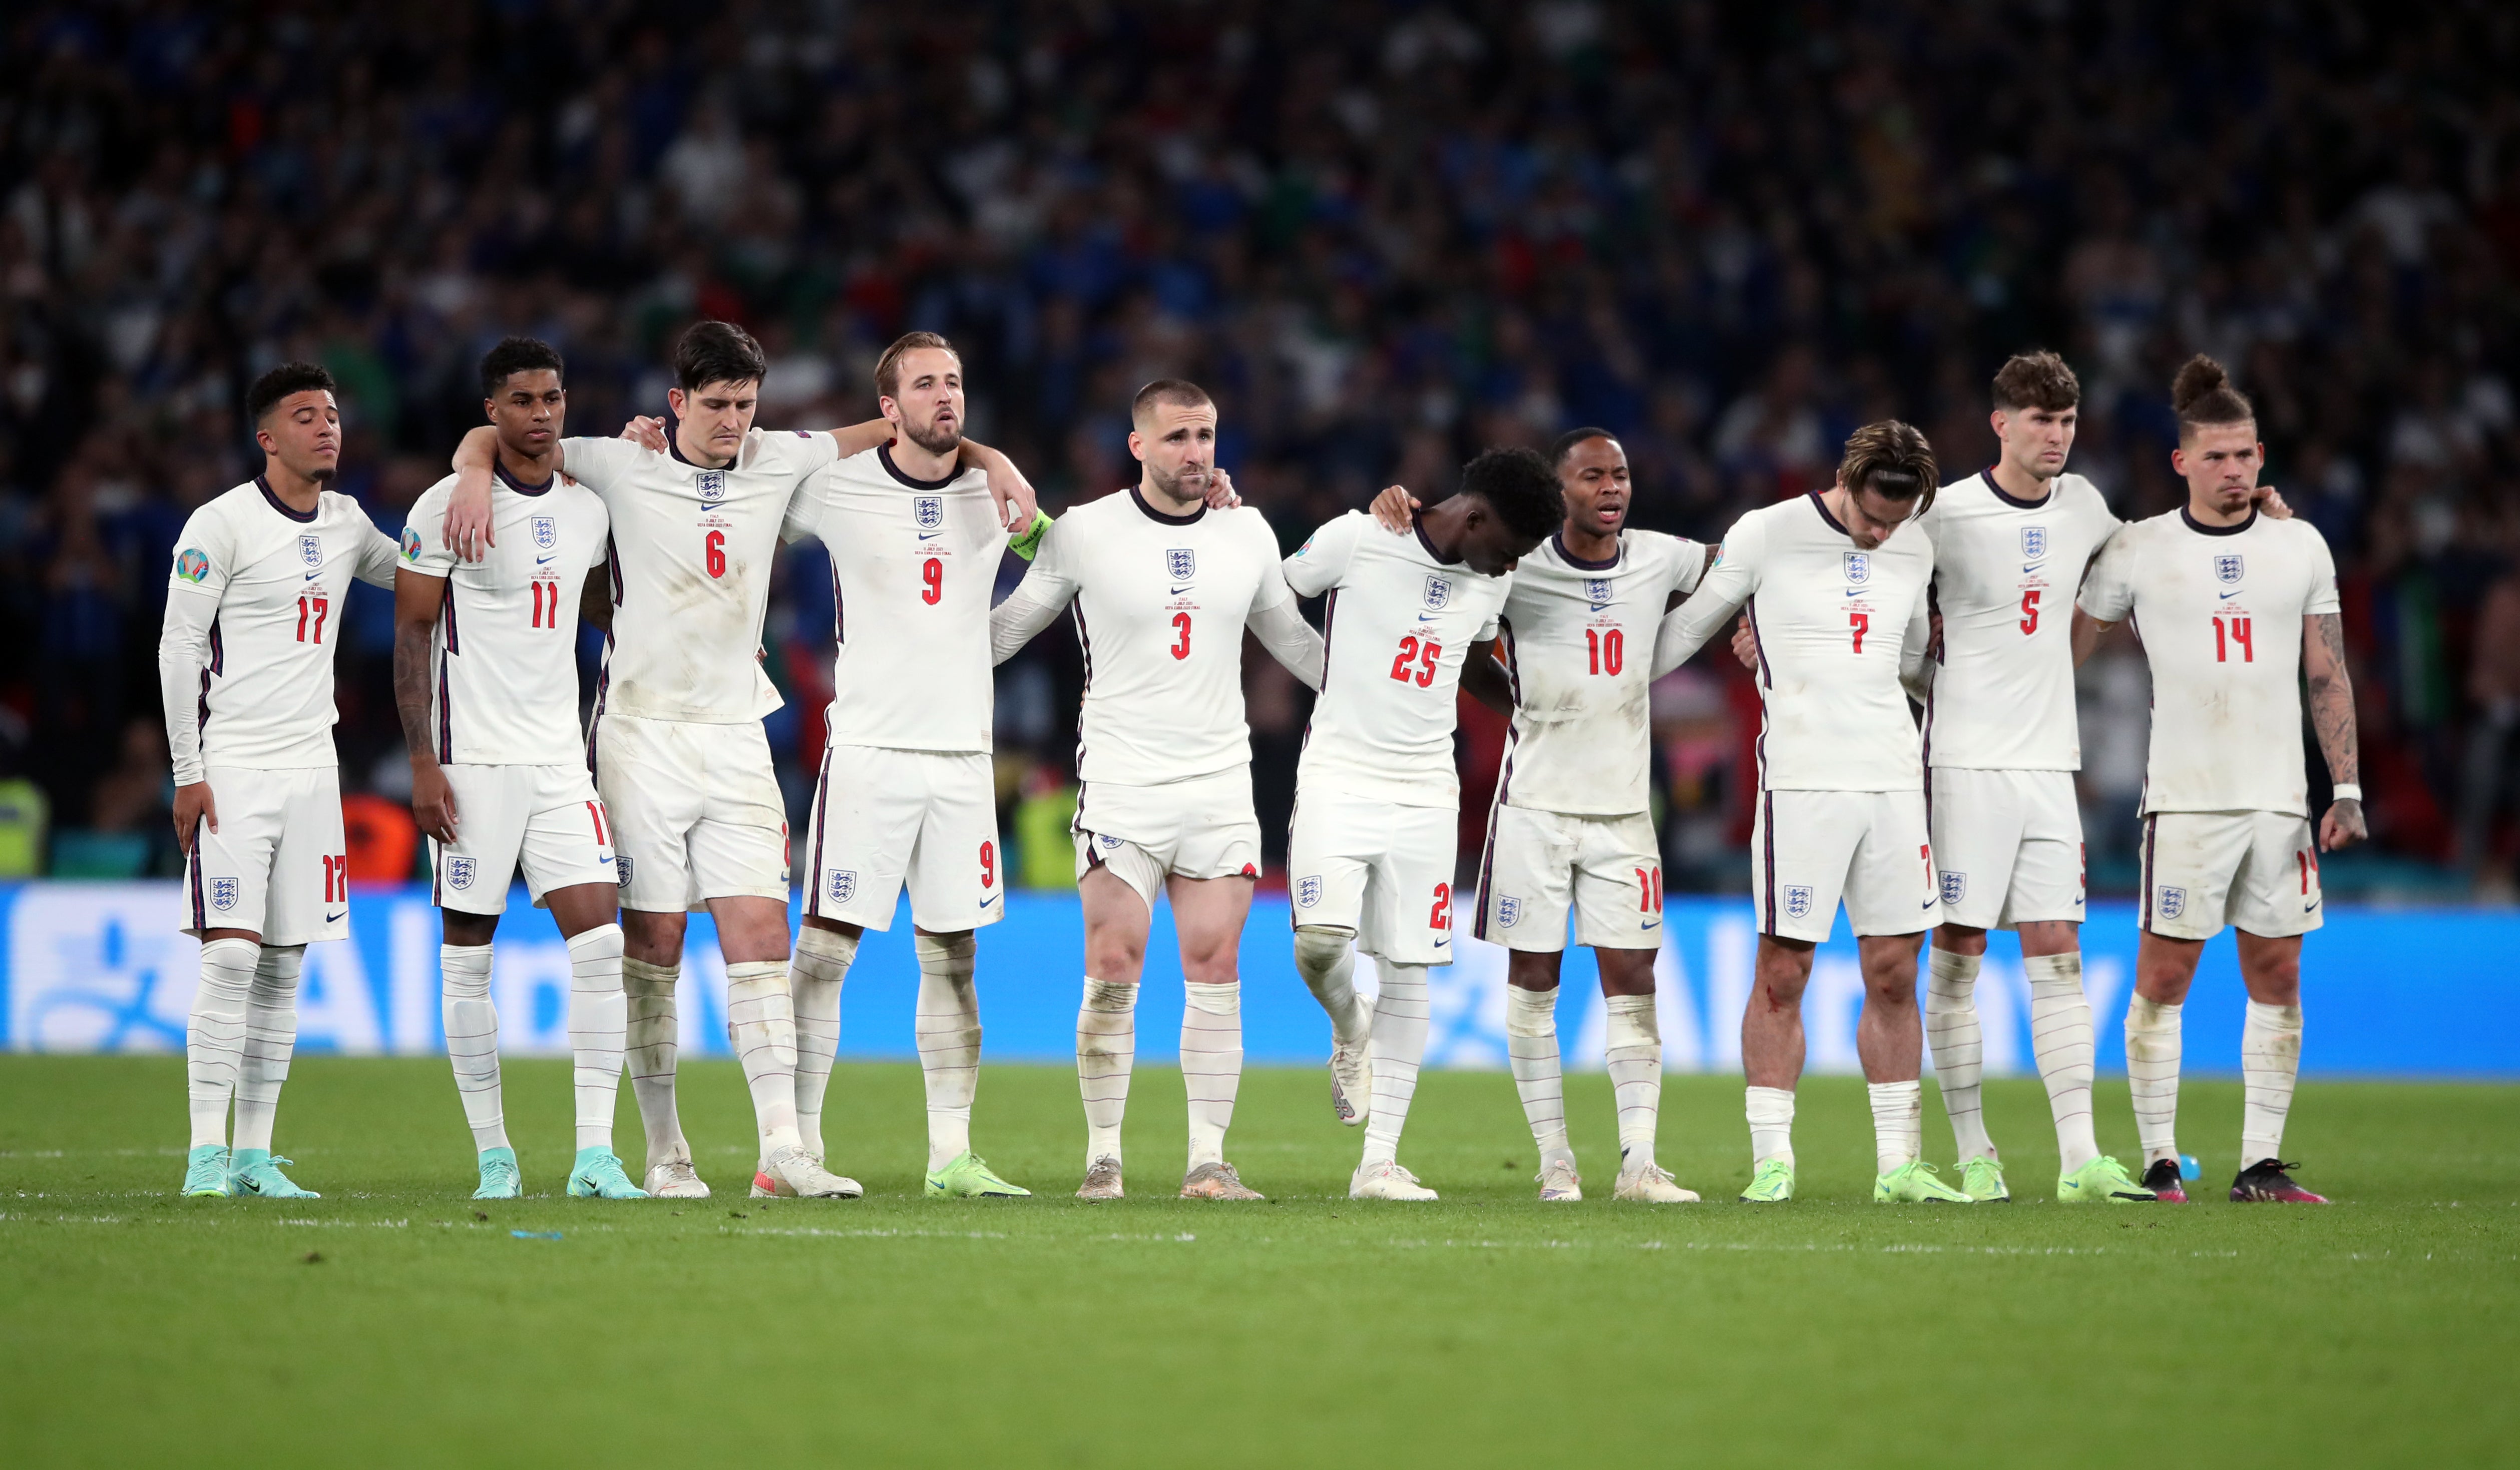 England players reflected on Euro 2020 after their heartbreaking loss to Italy